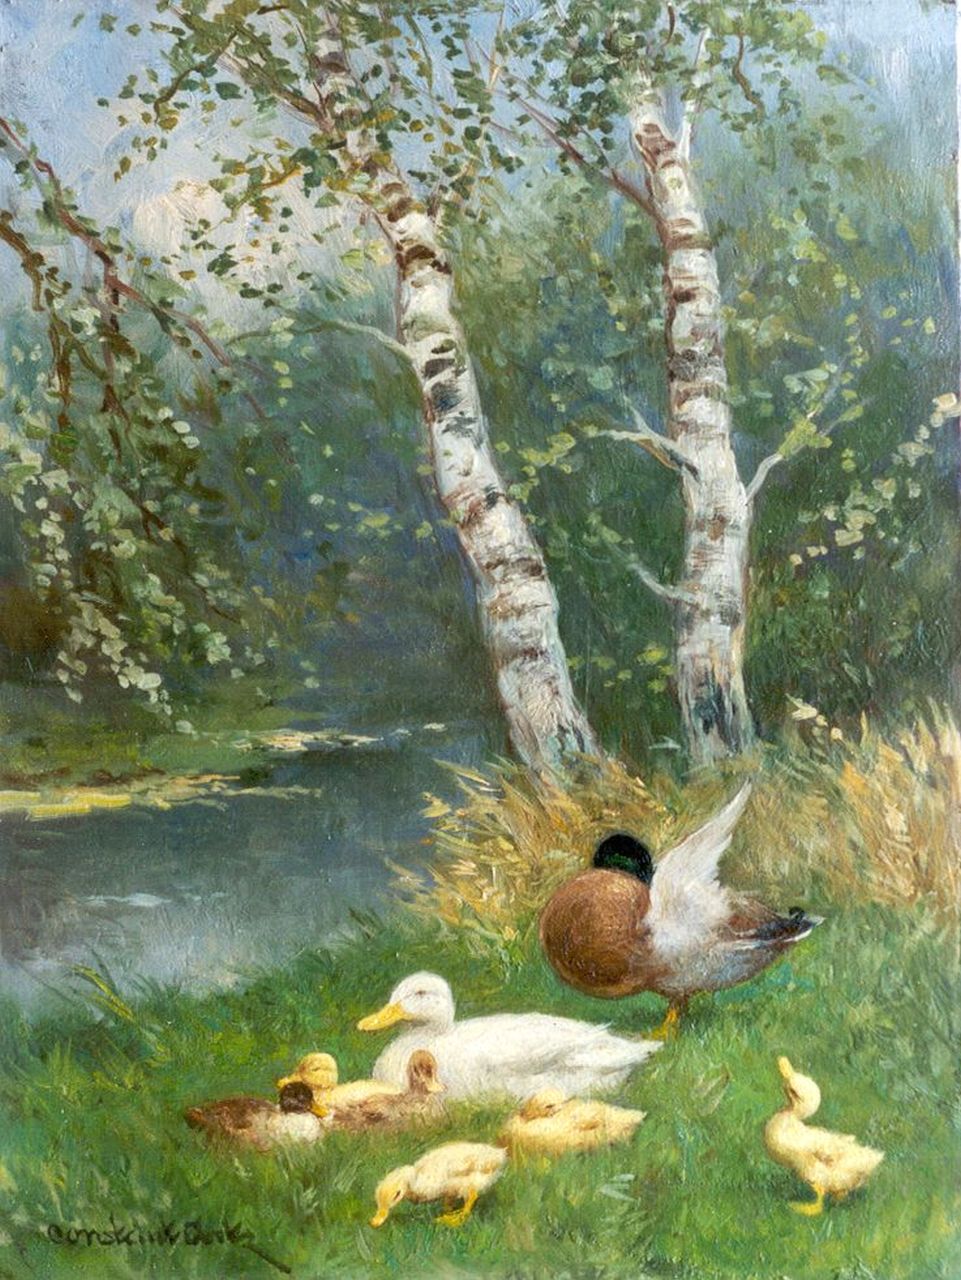 Artz C.D.L.  | 'Constant' David Ludovic Artz, Duck with ducklings on the riverbank, oil on panel 24.0 x 18.0 cm, signed l.l.